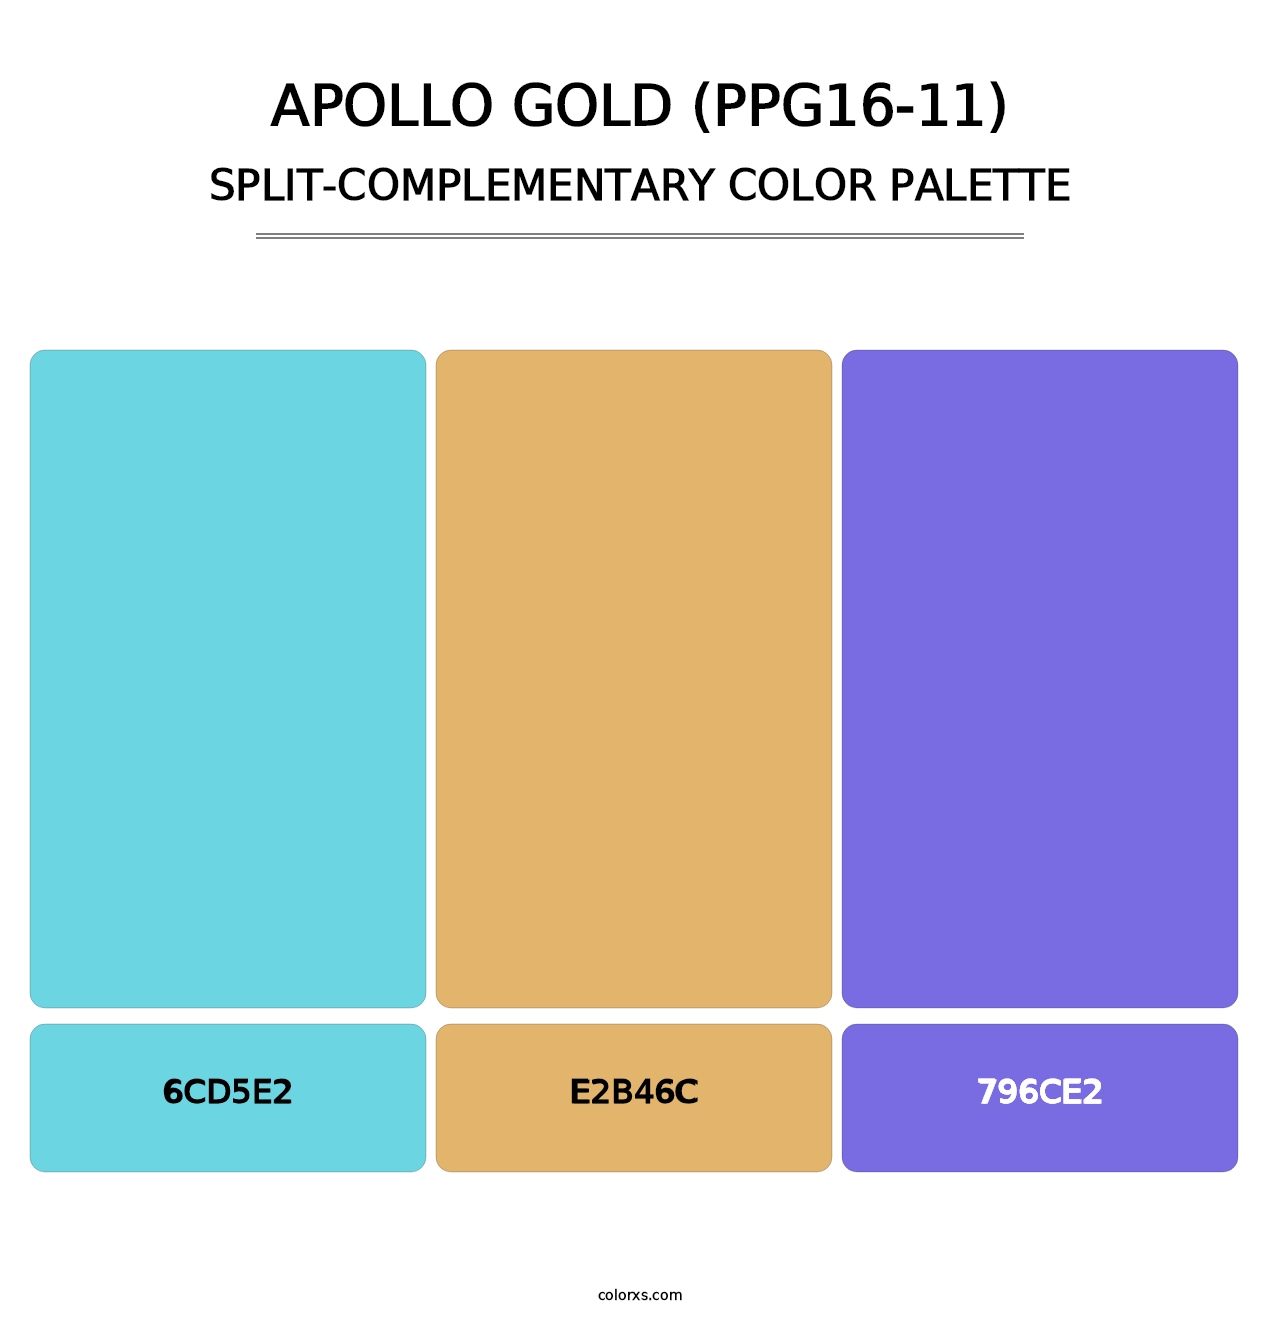 Apollo Gold (PPG16-11) - Split-Complementary Color Palette